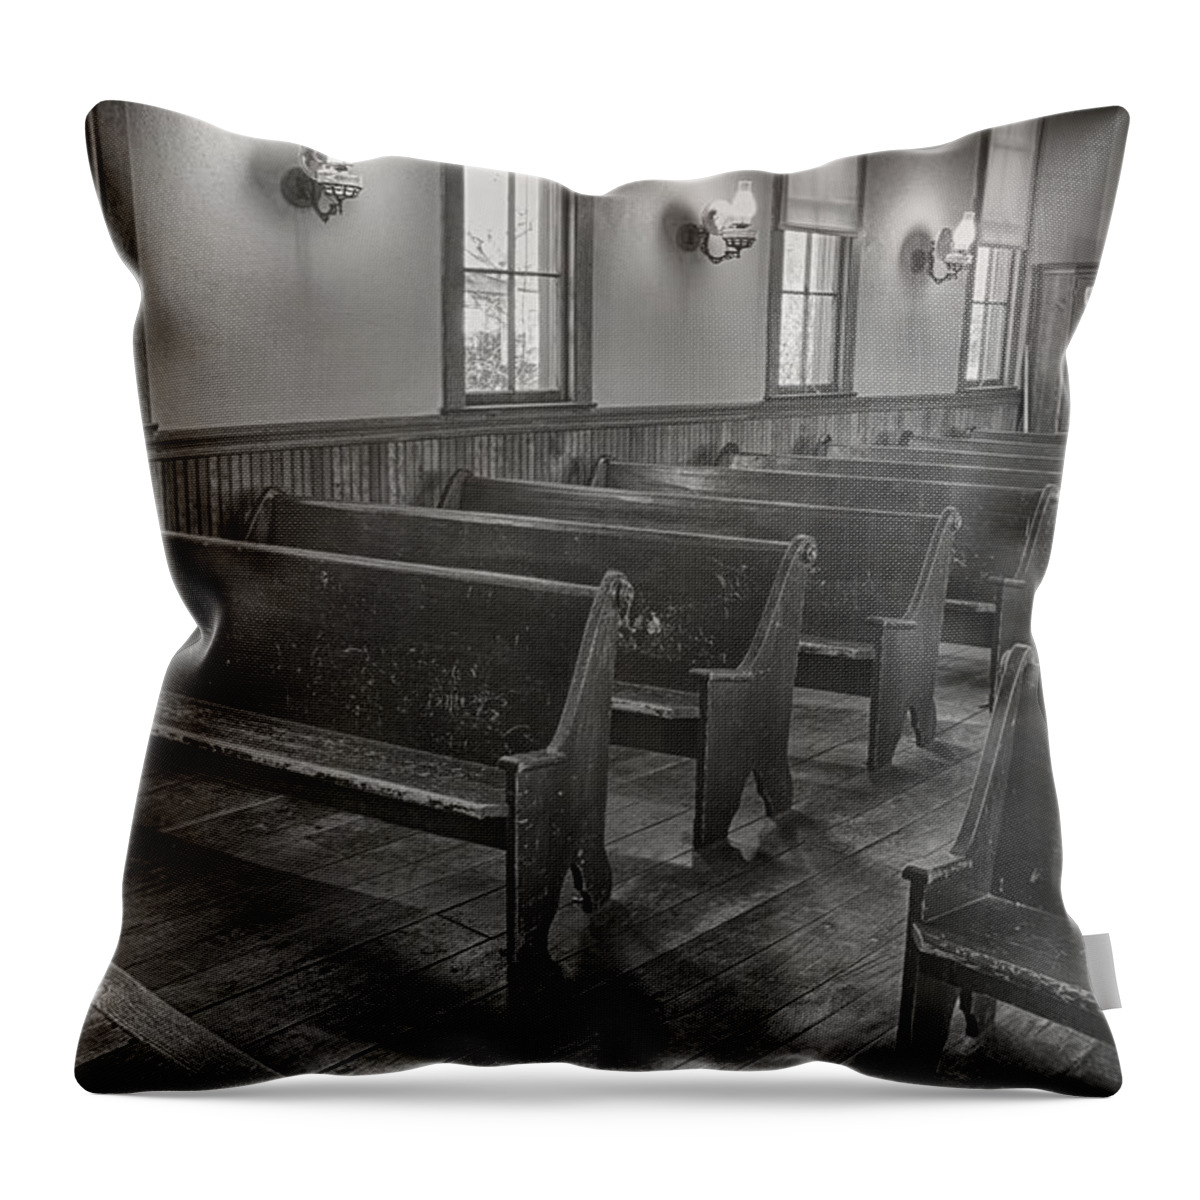 Jay Stockhaus Throw Pillow featuring the photograph Old Church by Jay Stockhaus